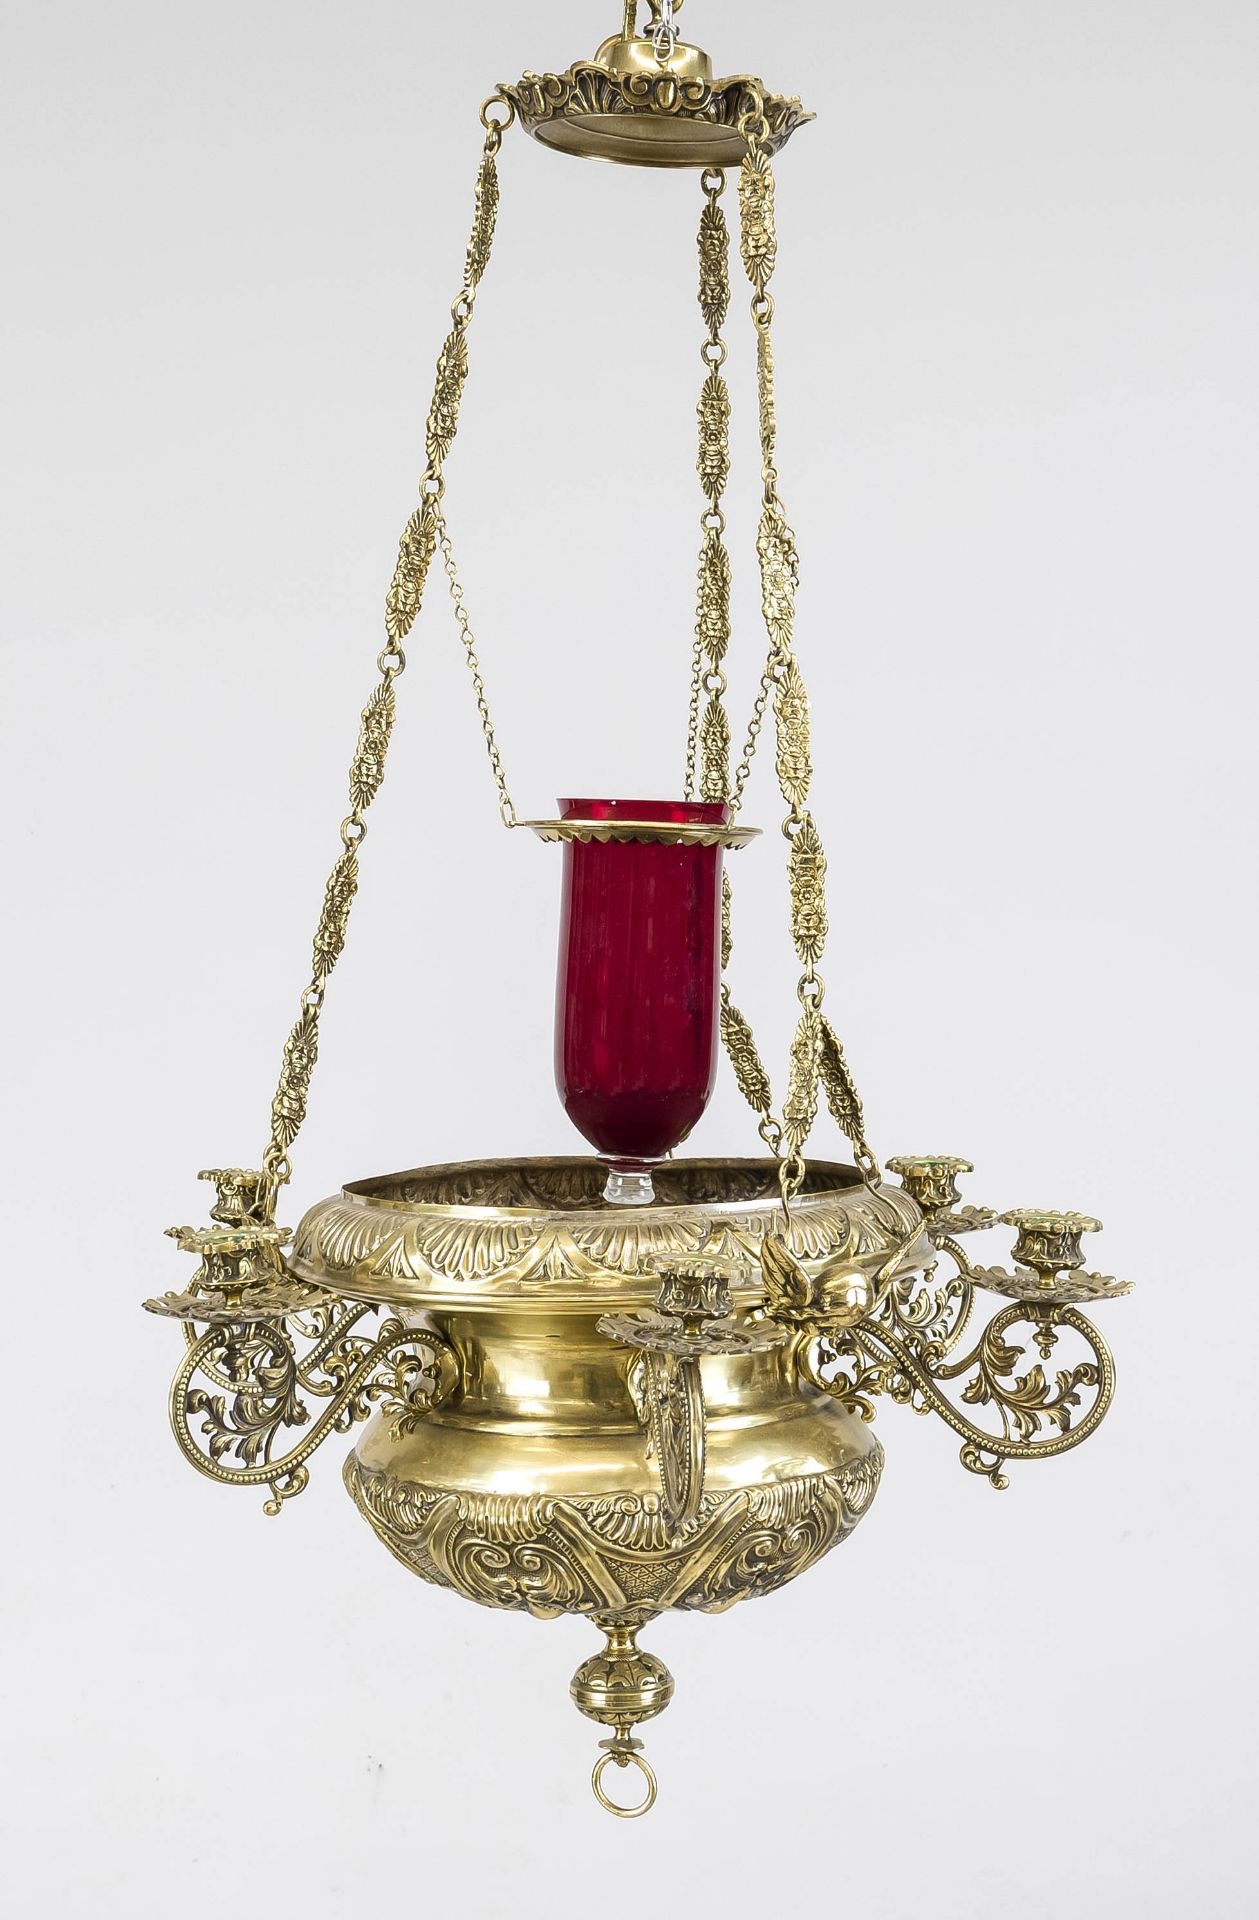 Ceiling chandelier, late 19th century, brass. Ornamented with 6 candlesticks with vase sleeves.